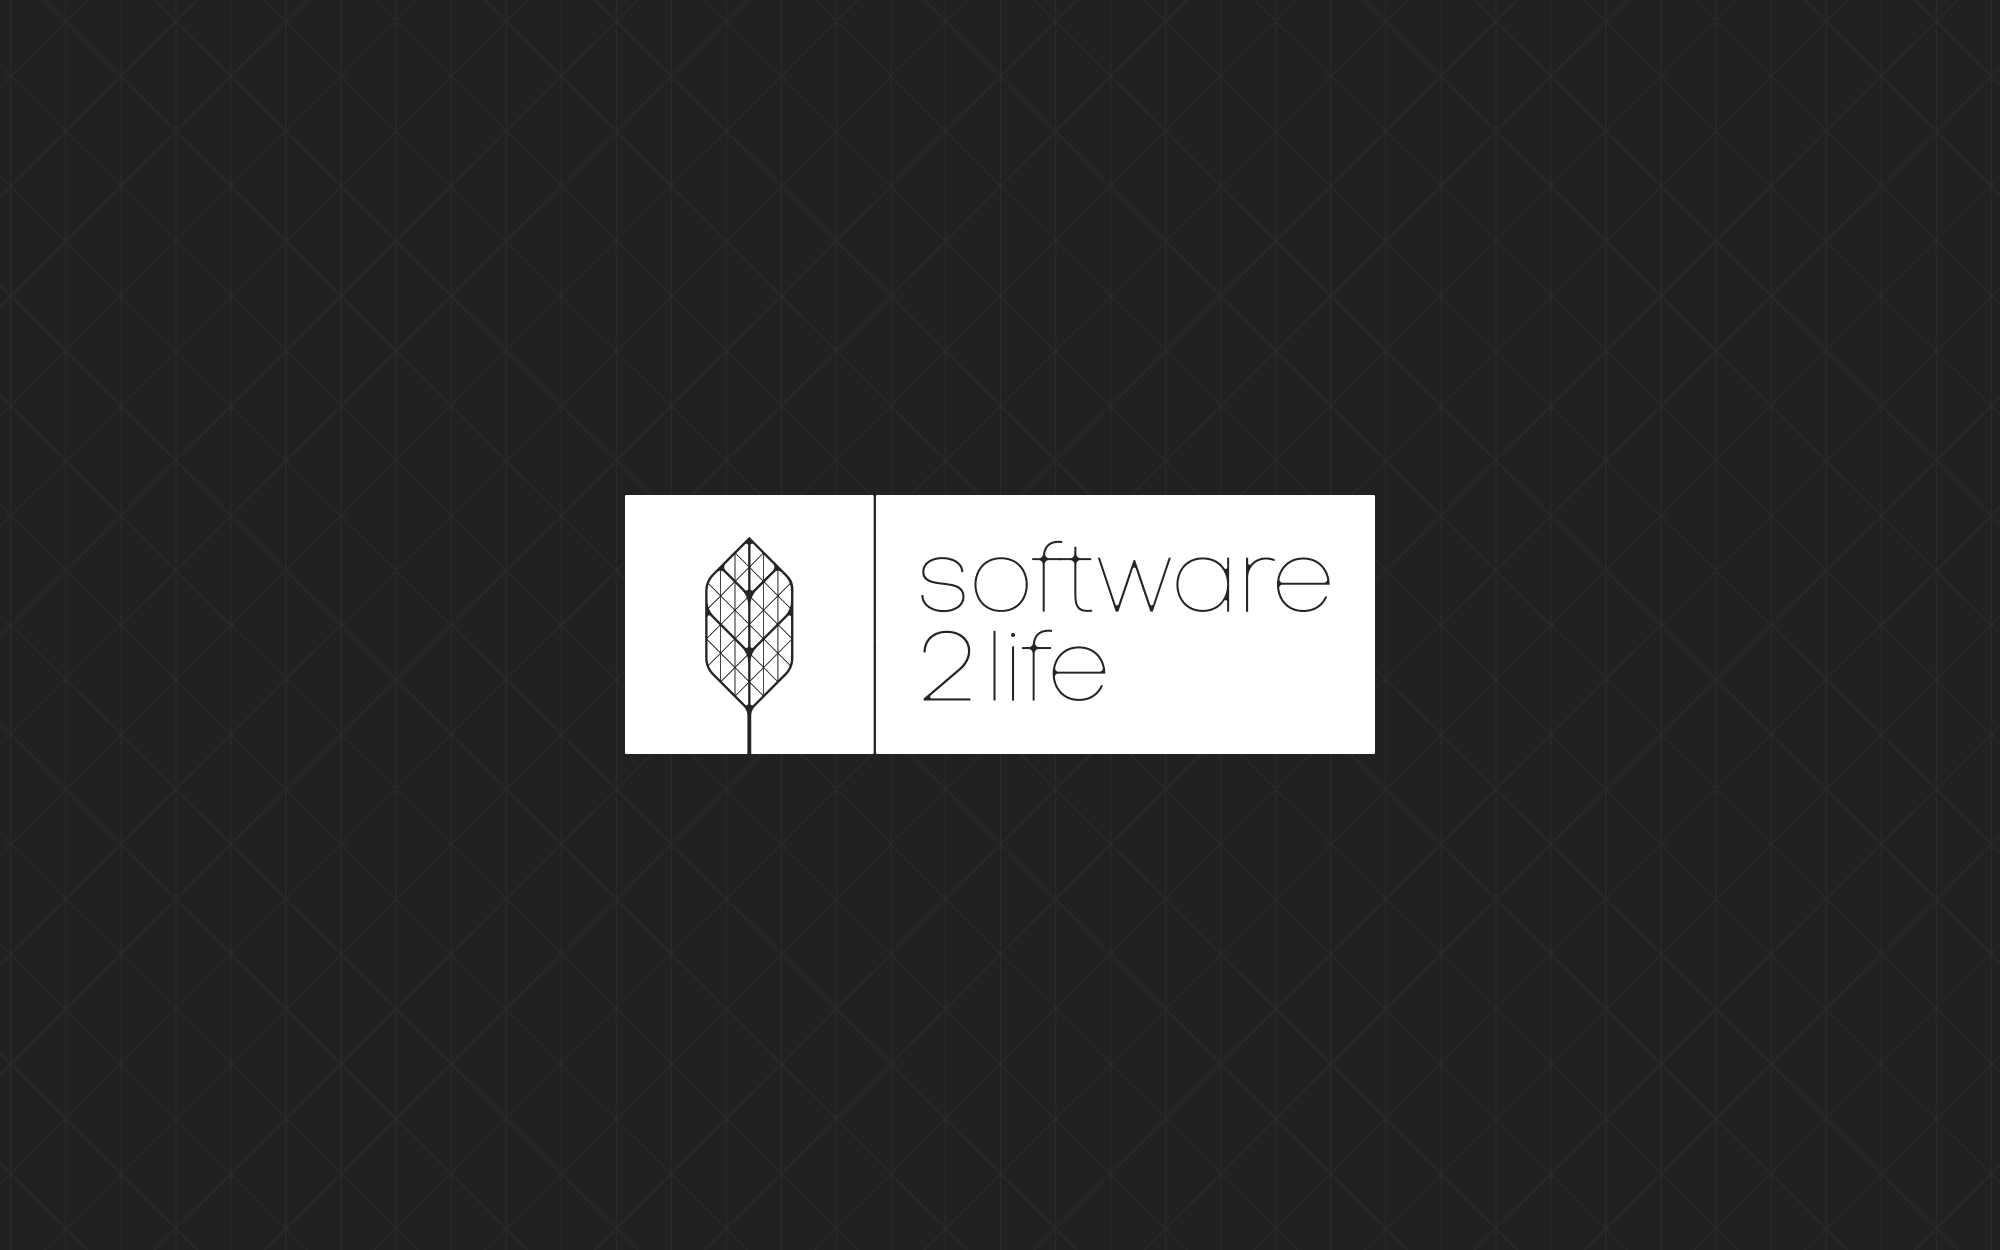 Software2life identity by Proxima agency - Creative Work